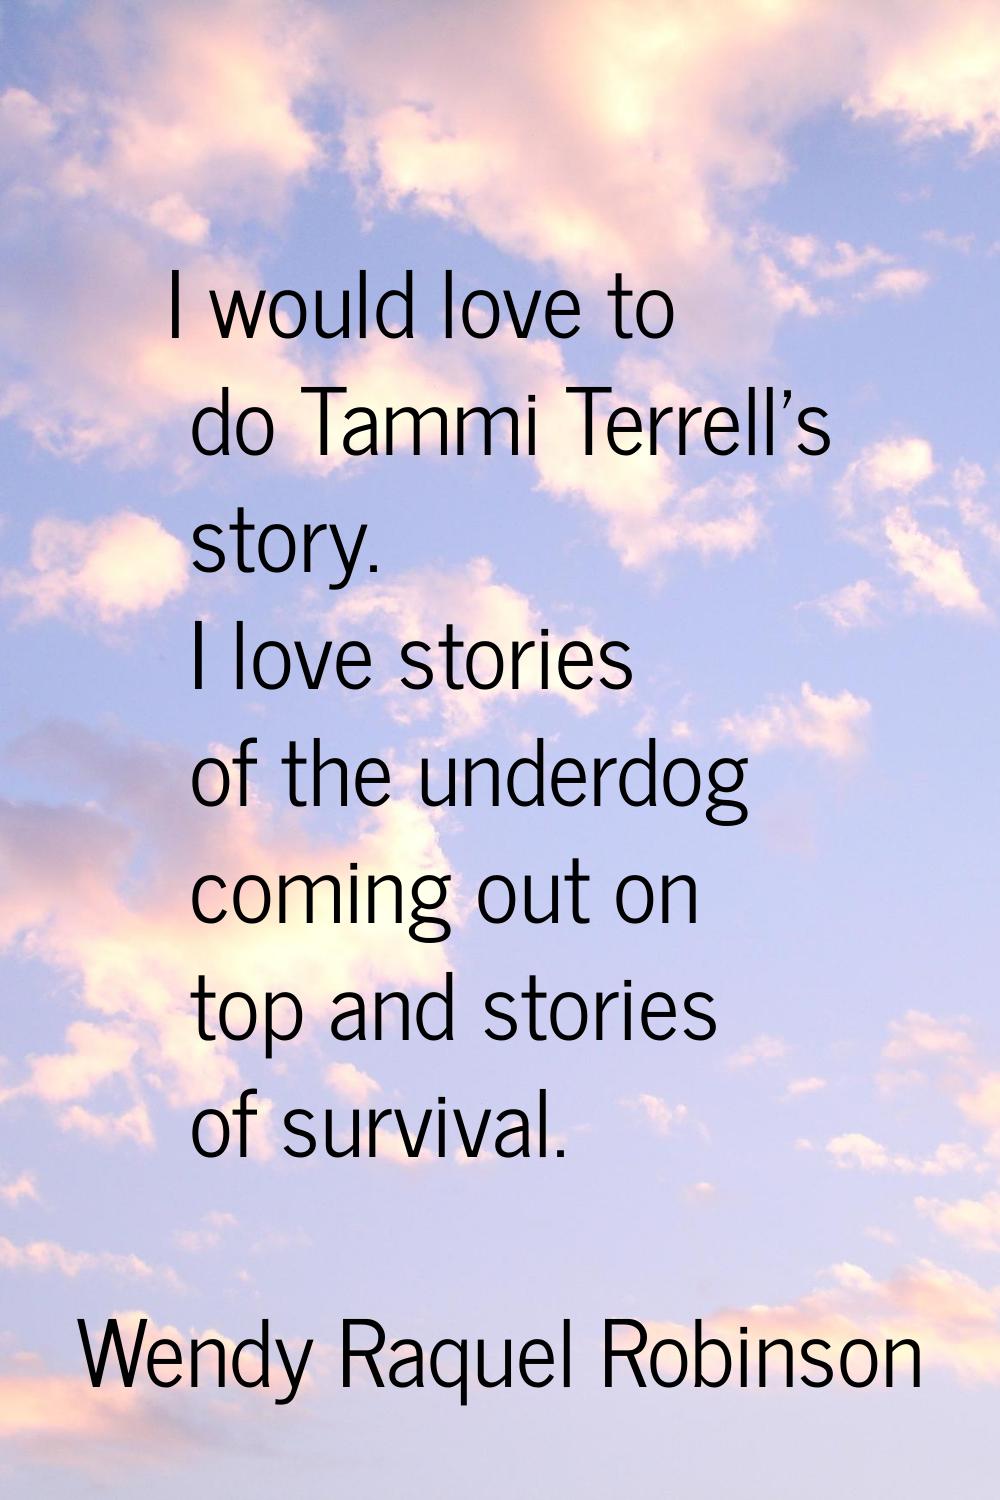 I would love to do Tammi Terrell's story. I love stories of the underdog coming out on top and stor